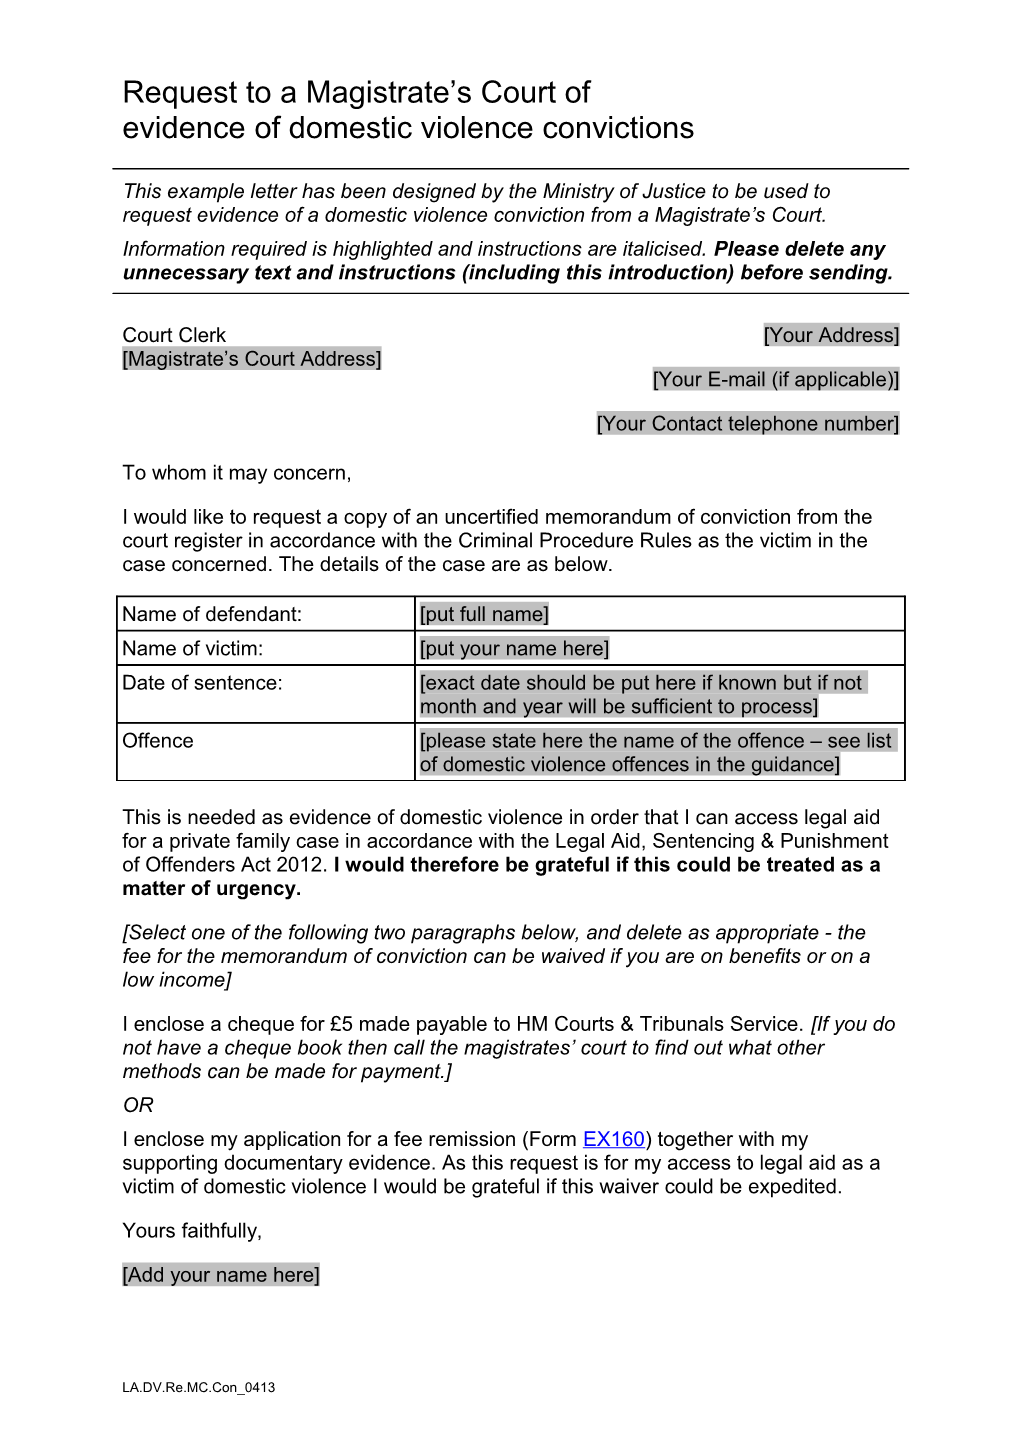 Template Letter (A) for Request of Evidence of Conviction from a Magistrates Court